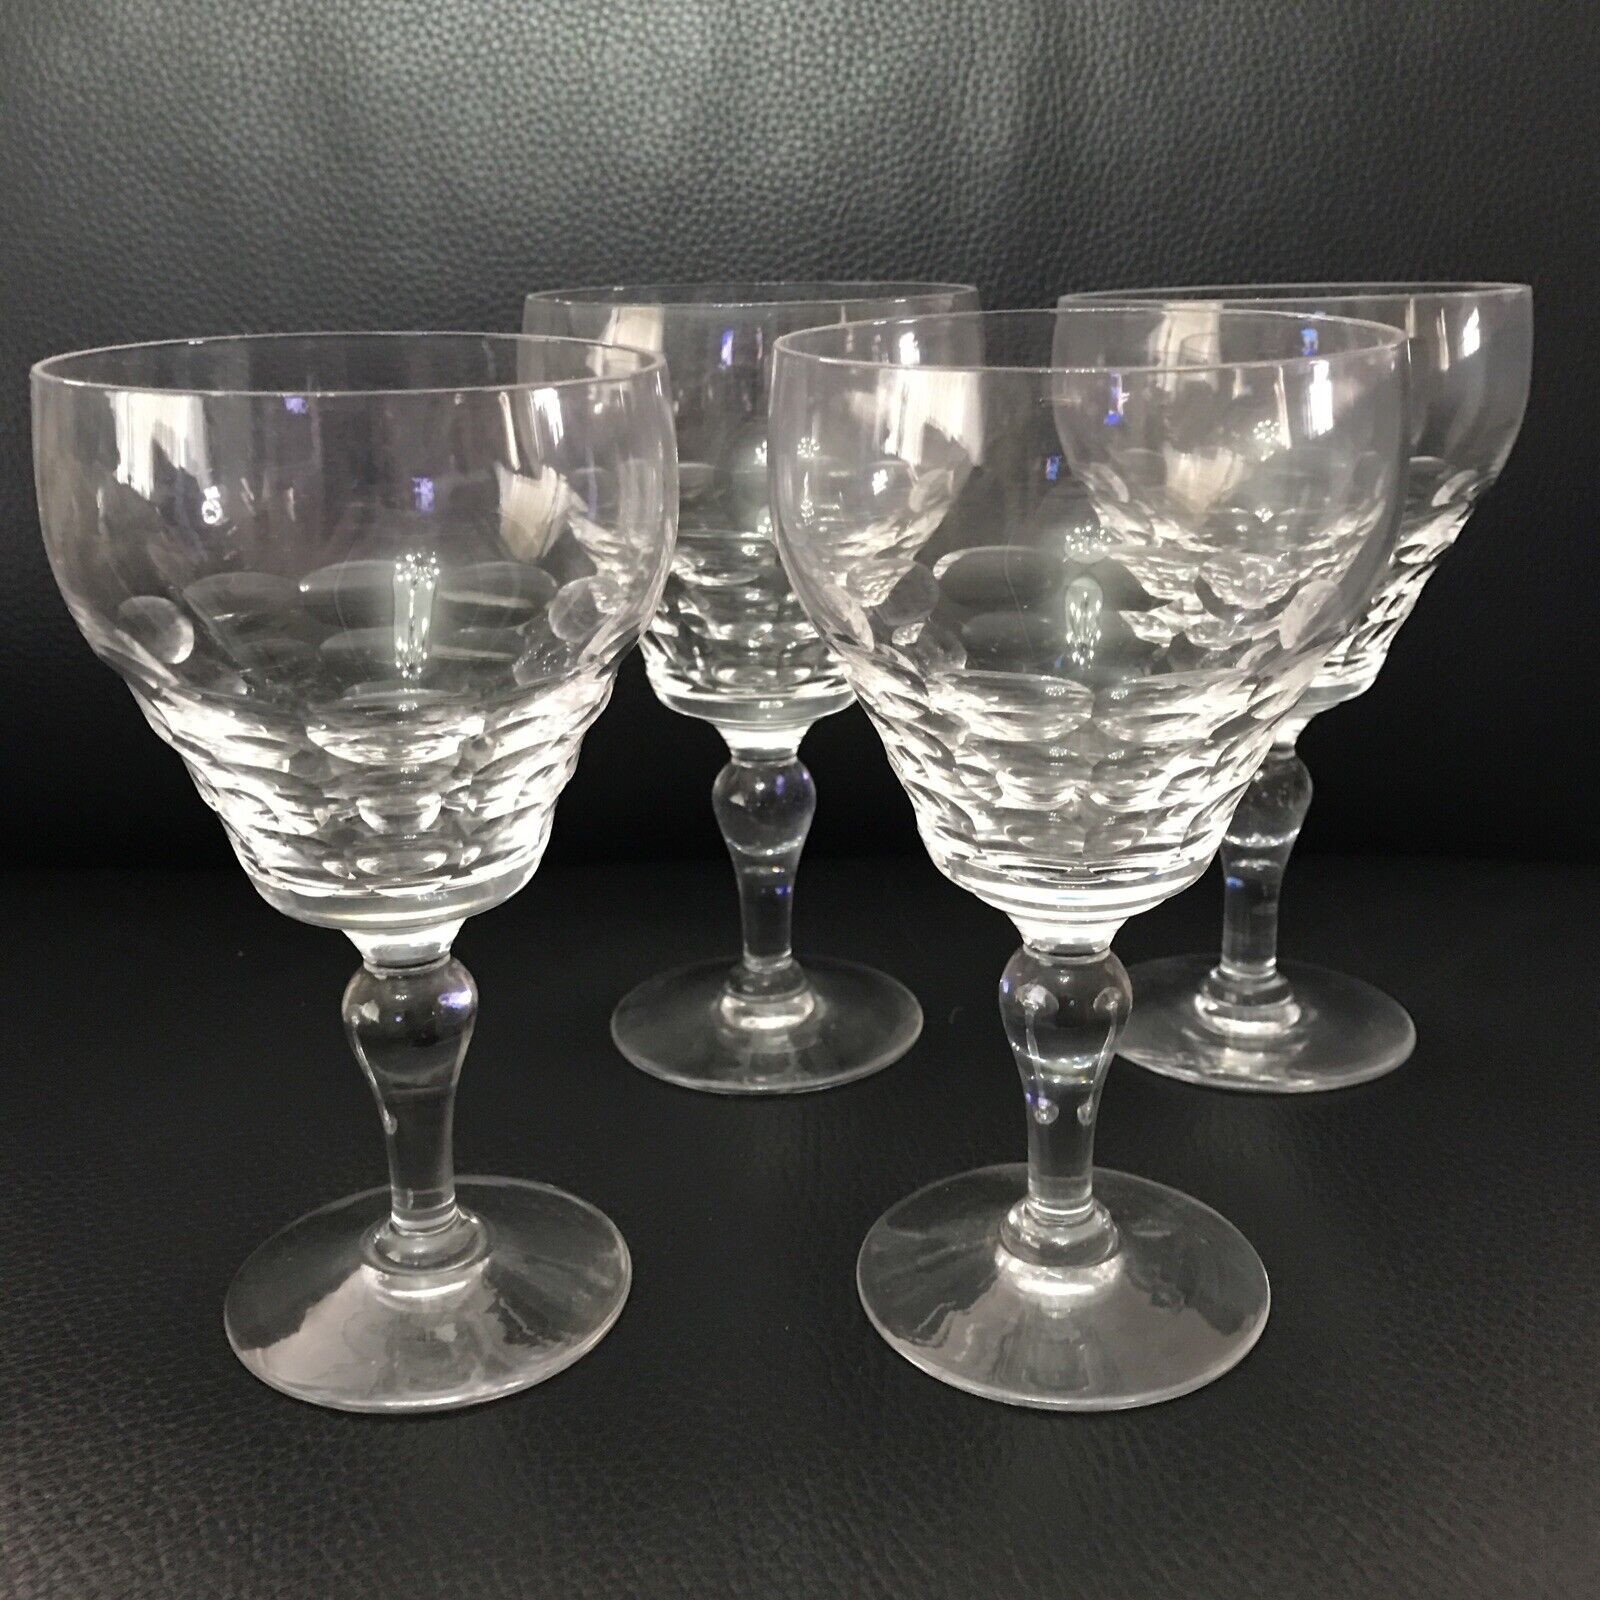 Set of 4 STUART Crystal Cocktail Wine Water Glass Chippendale. England. Marked.